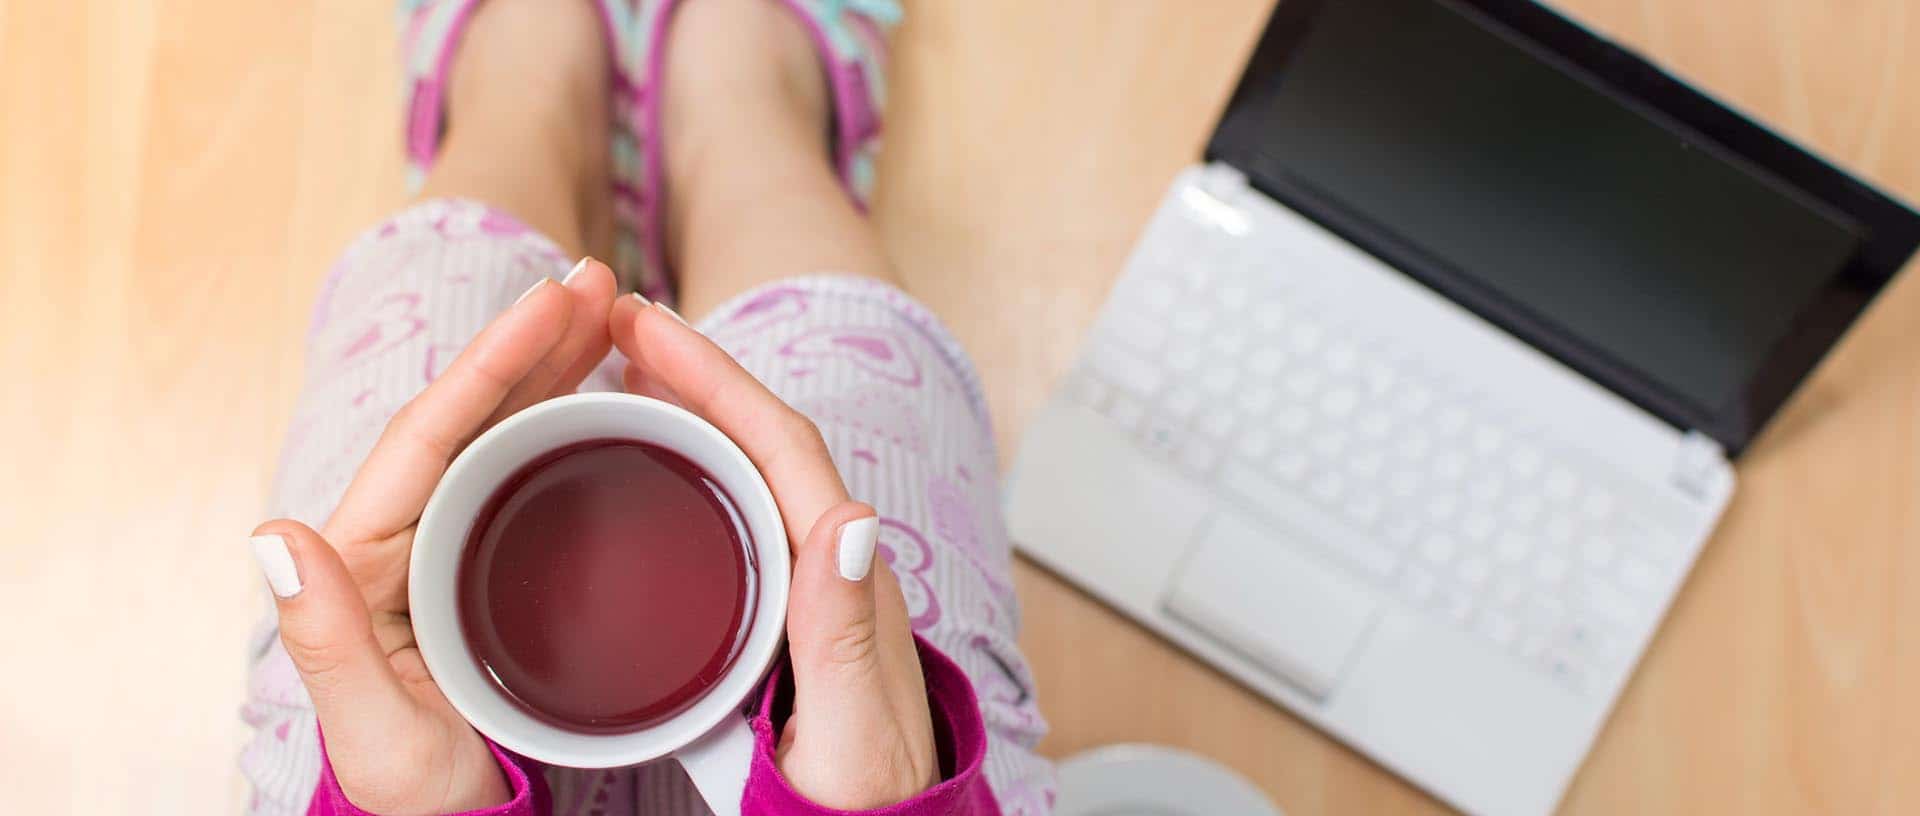 Freelance copywriter holding cup of tea, wearing pyjamas and slippers, with computer on the floor